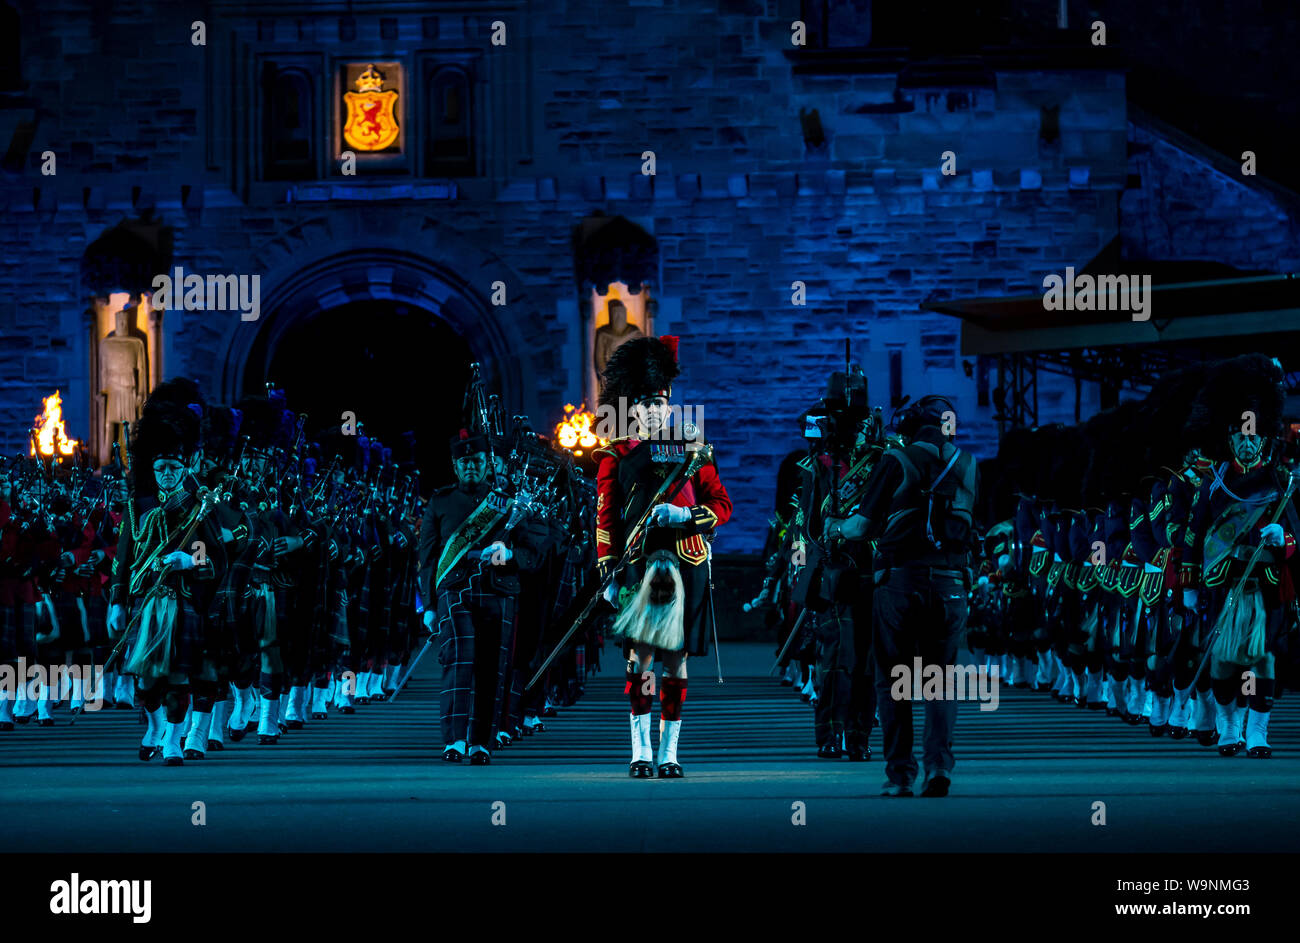 Edinburgh, Scotland, UK. 14th Aug 2019. Royal Edinburgh Military Tattoo 2019 Kaleidoscope on Castle Esplanade in its 69th show inspired by the optical instrument by Scottish scientist Sir David Brewster and Sir Isaac Newton's seven colours. It features traditional Massed Pipes and Drums. A marching band playing bagpipes in Scottish military uniform with kilts and puttees Stock Photo